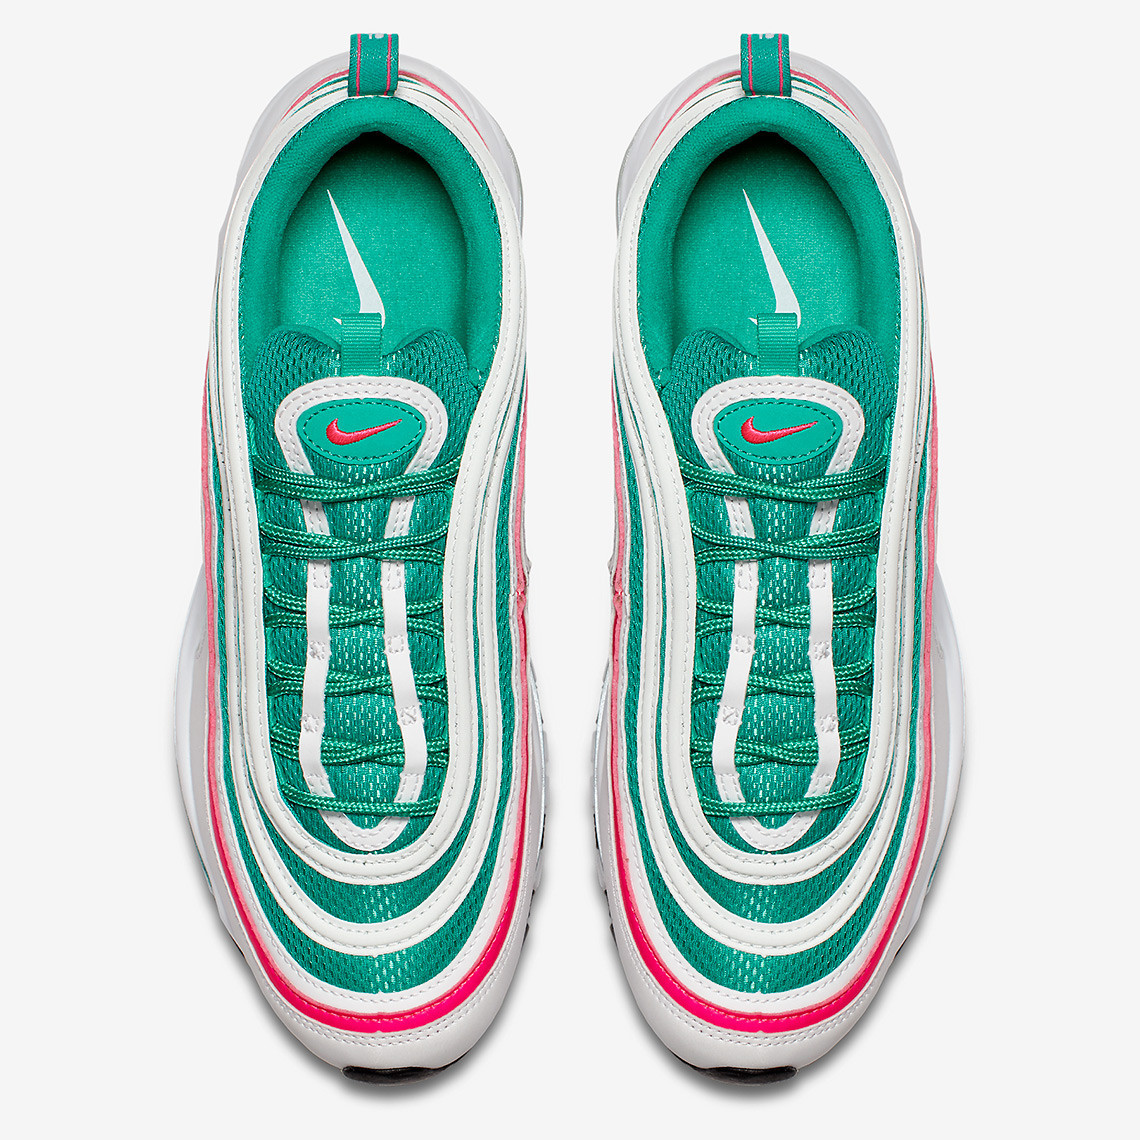 Refresh Your Collection With The Nike Air Max 97 'South Beach'